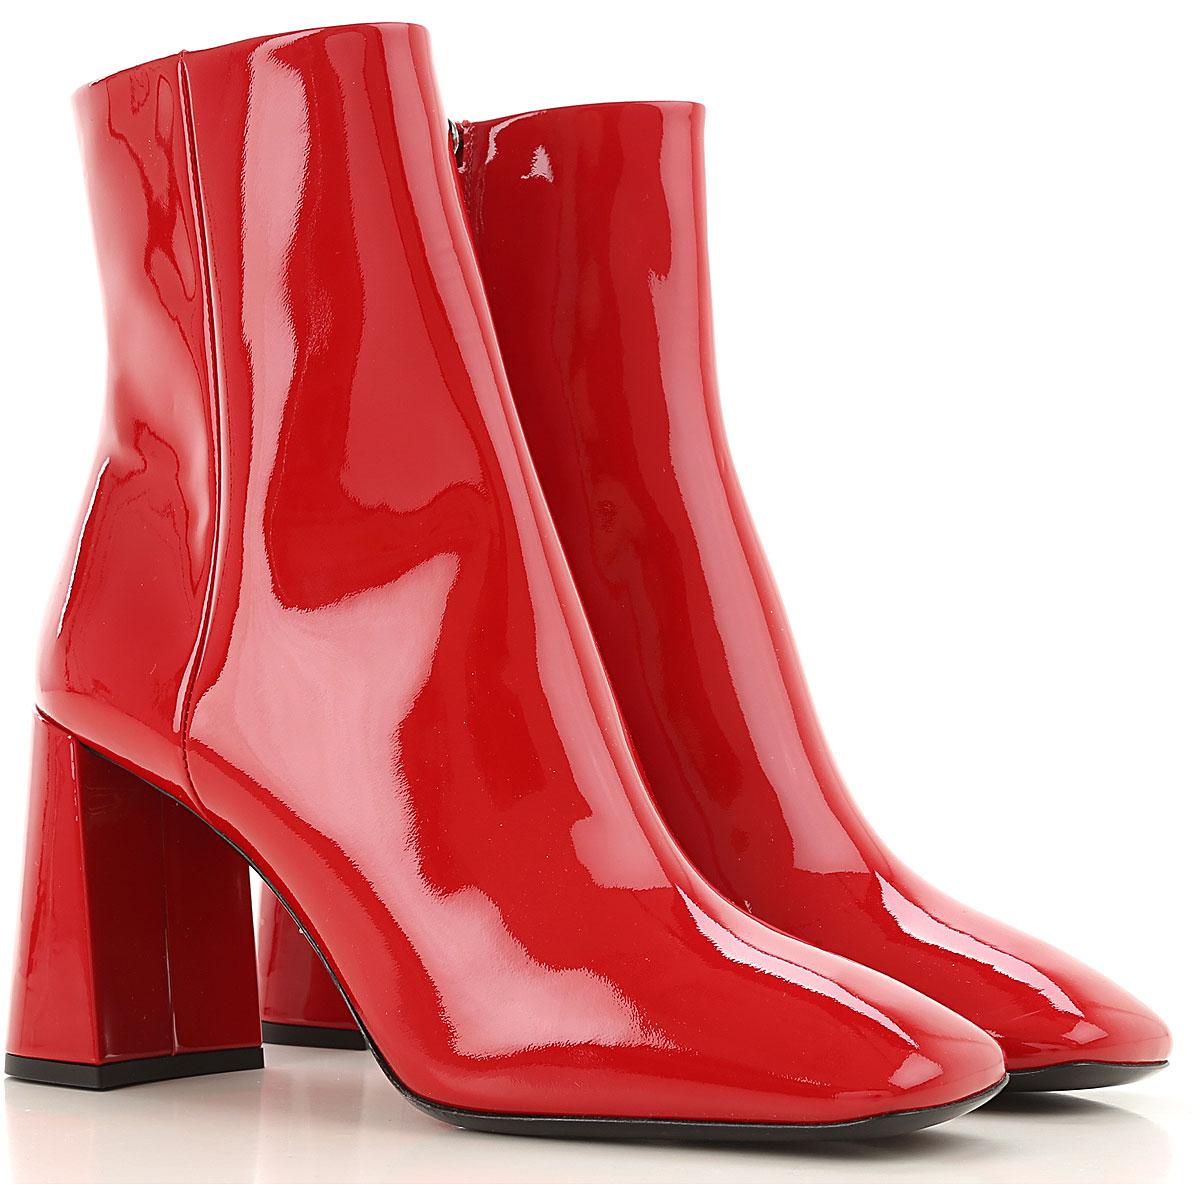 Prada Block Heel Patent Leather Bootie in Red - Save 35% - Lyst